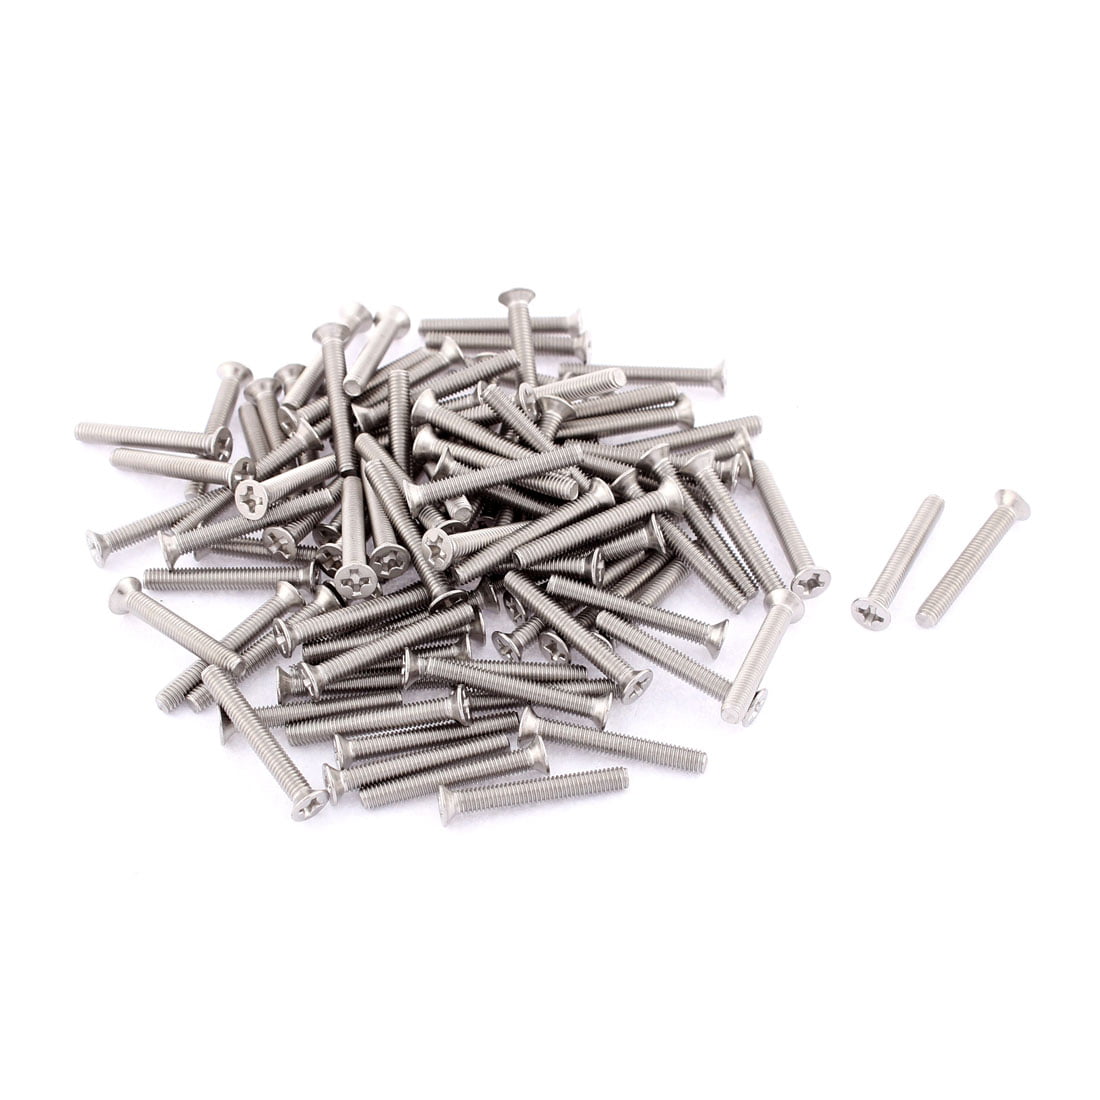 M3 x 22mm Phillips Socket Stainless Steel Countersunk Bolts Screws 50pcs 